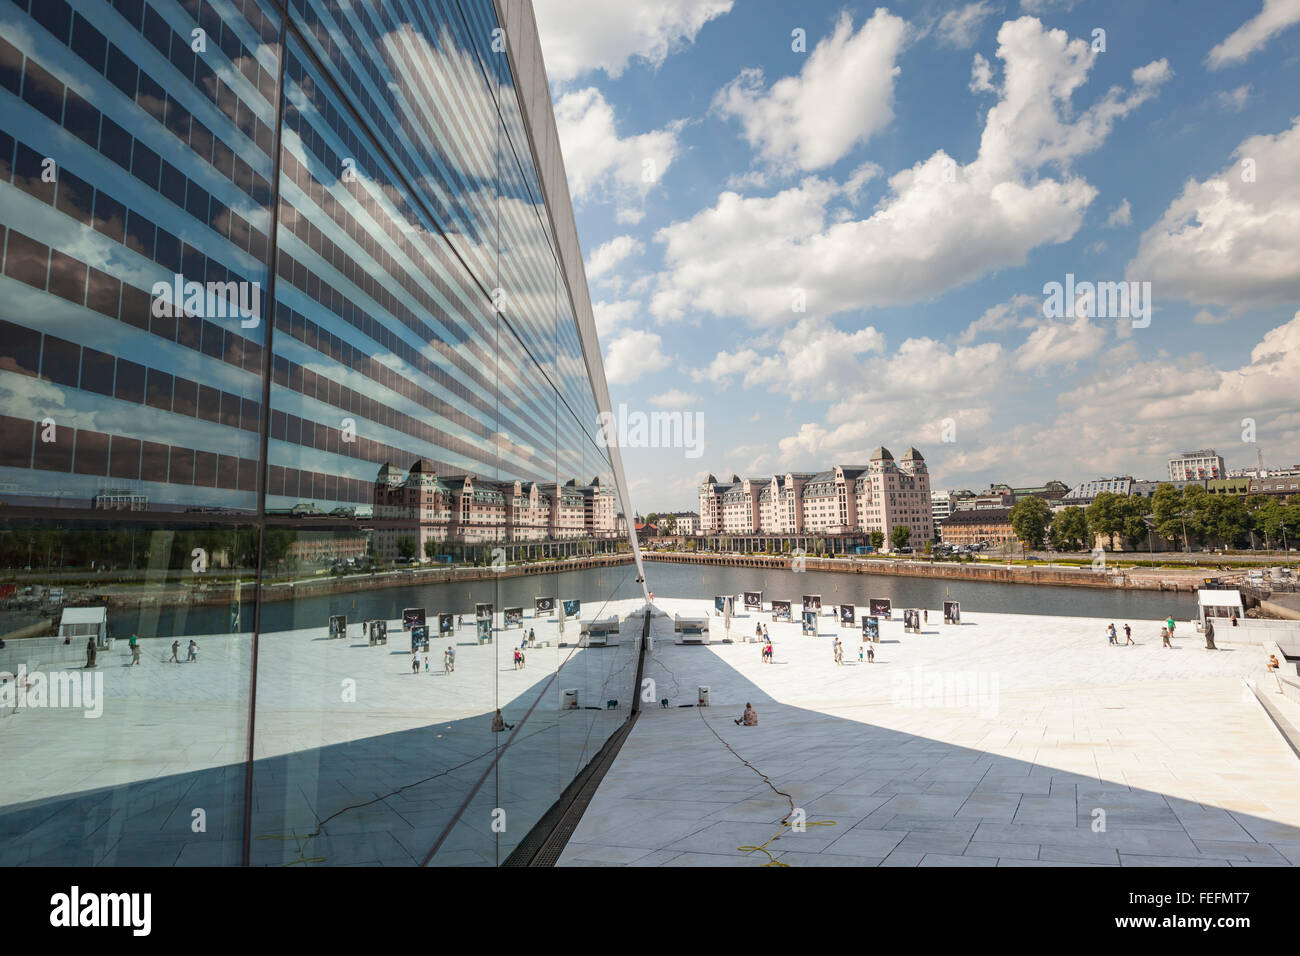 OSLO, NORWAY - JULY 09: View on a side of the National Oslo Opera House on July 09, 2014 in Oslo, Norway Stock Photo